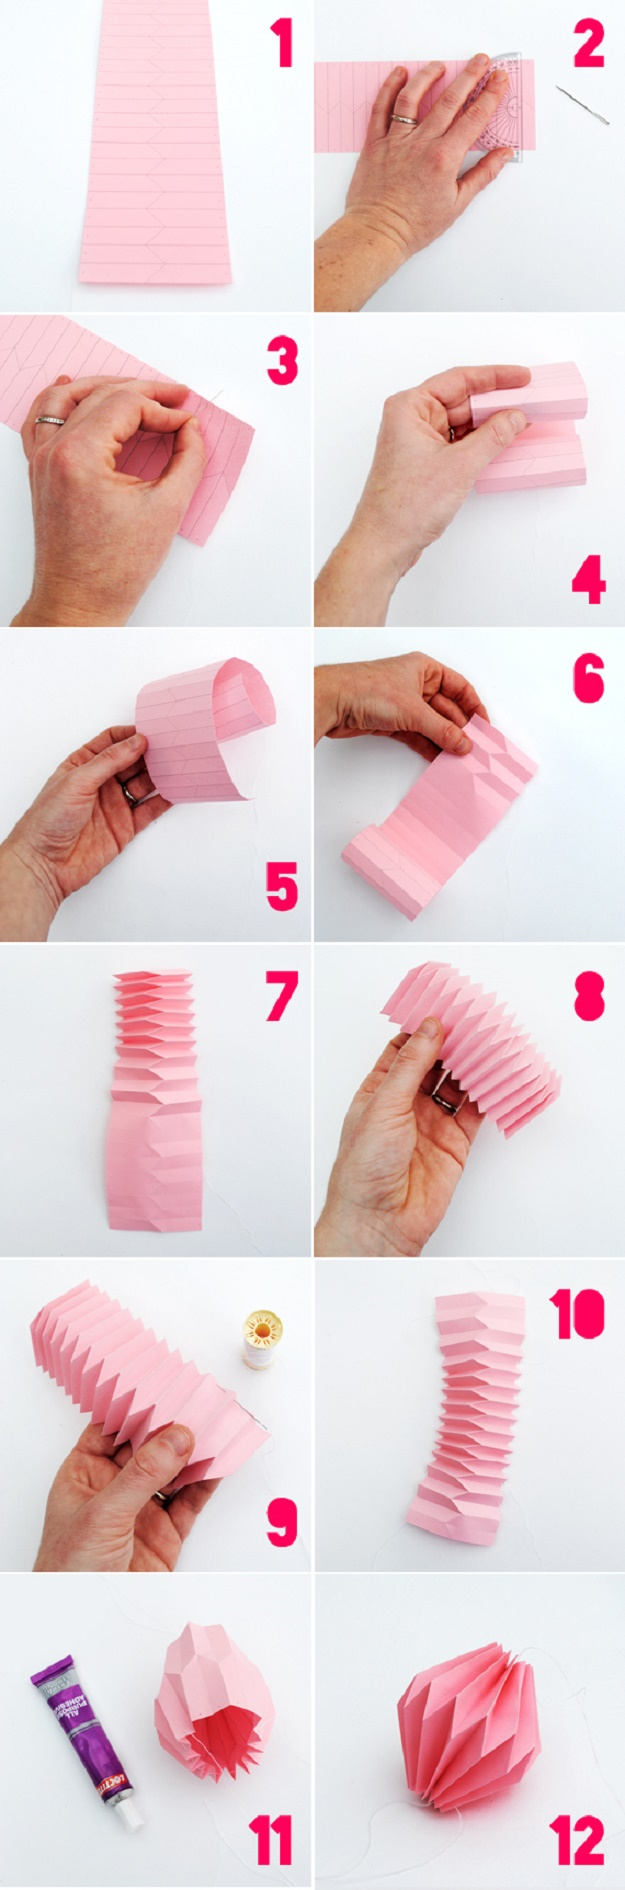 Origami Diy Decoration 40 Best Diy Origami Projects To Keep Your Entertained Today